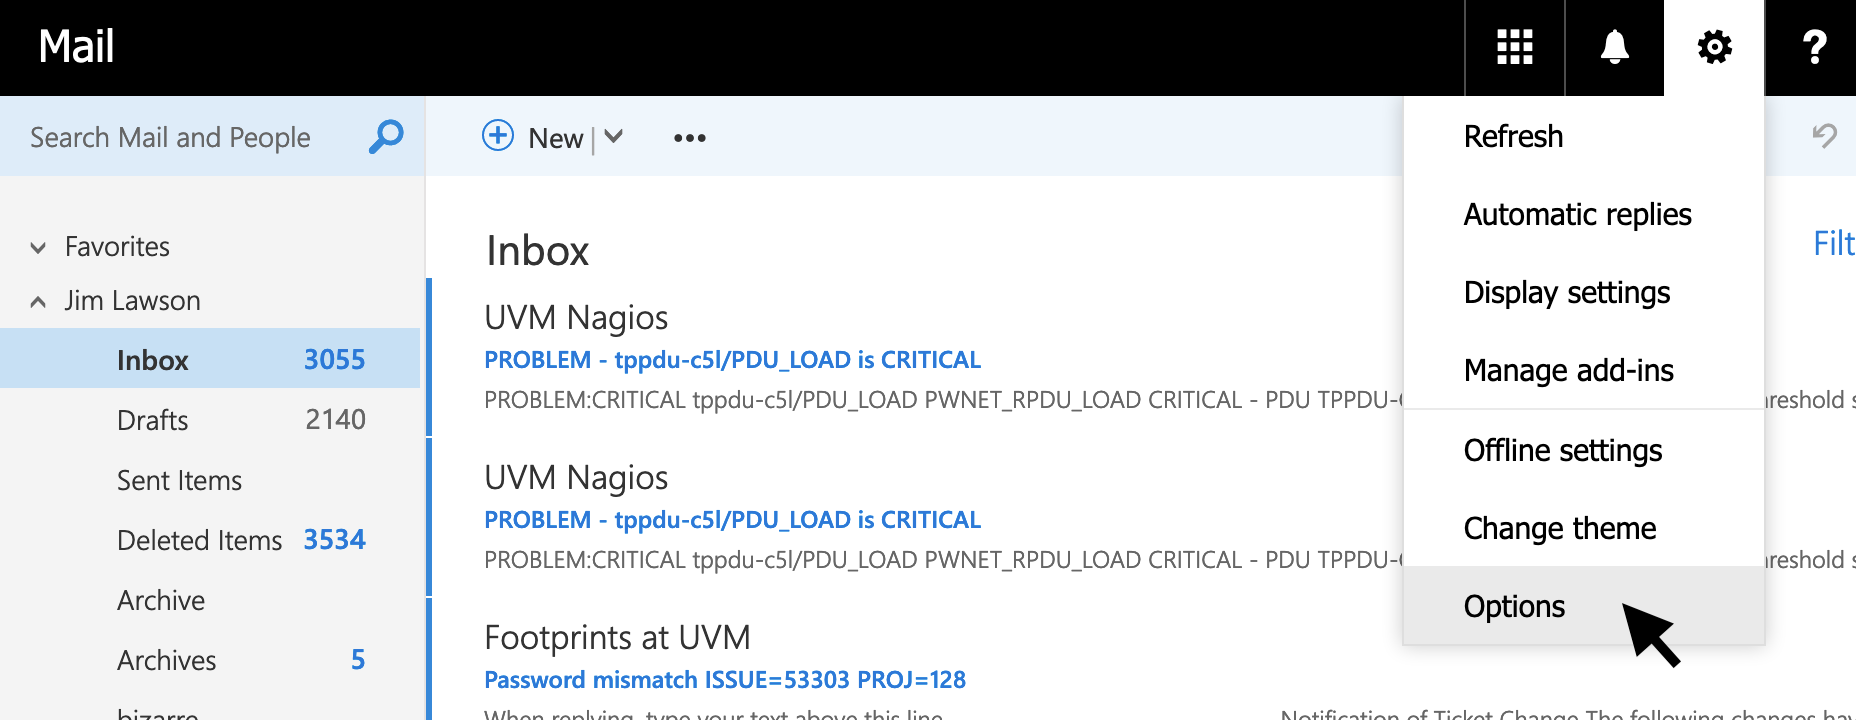 User selects "Options" from OWA Mail.